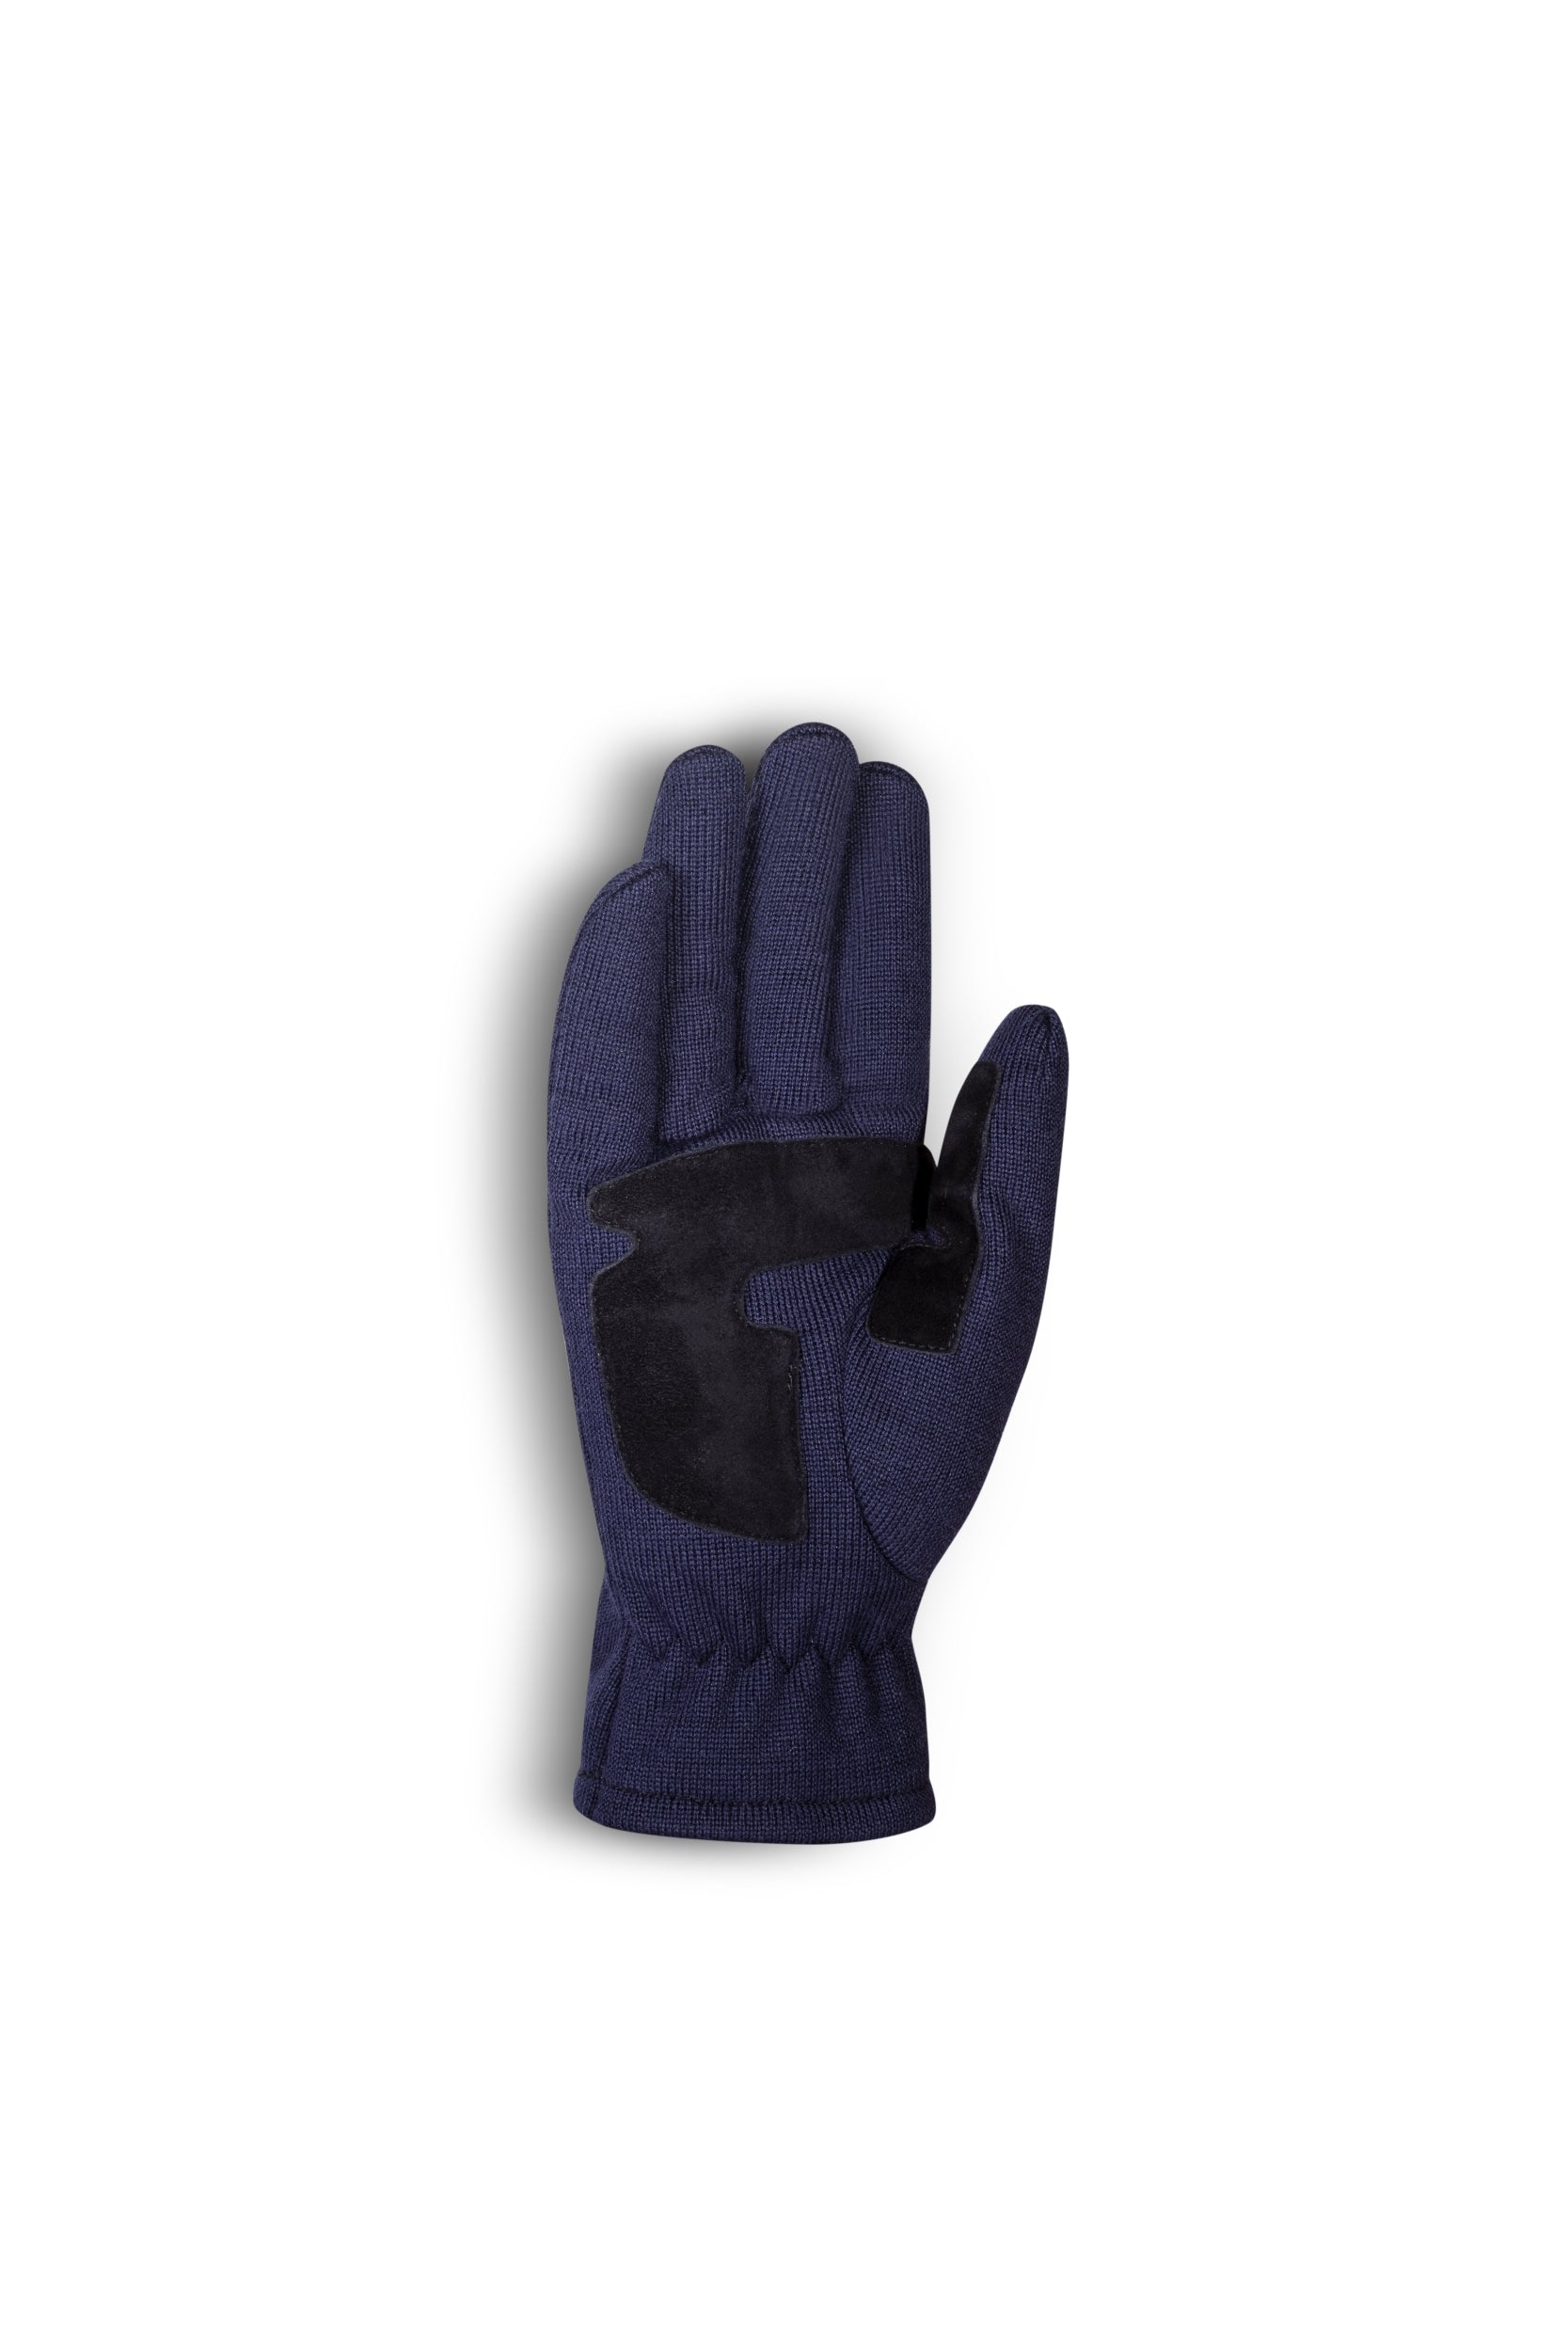 SPARCO 00208211BM NEW WOOL SPORTDRIVE Gloves, navy blue, size 11 Photo-1 